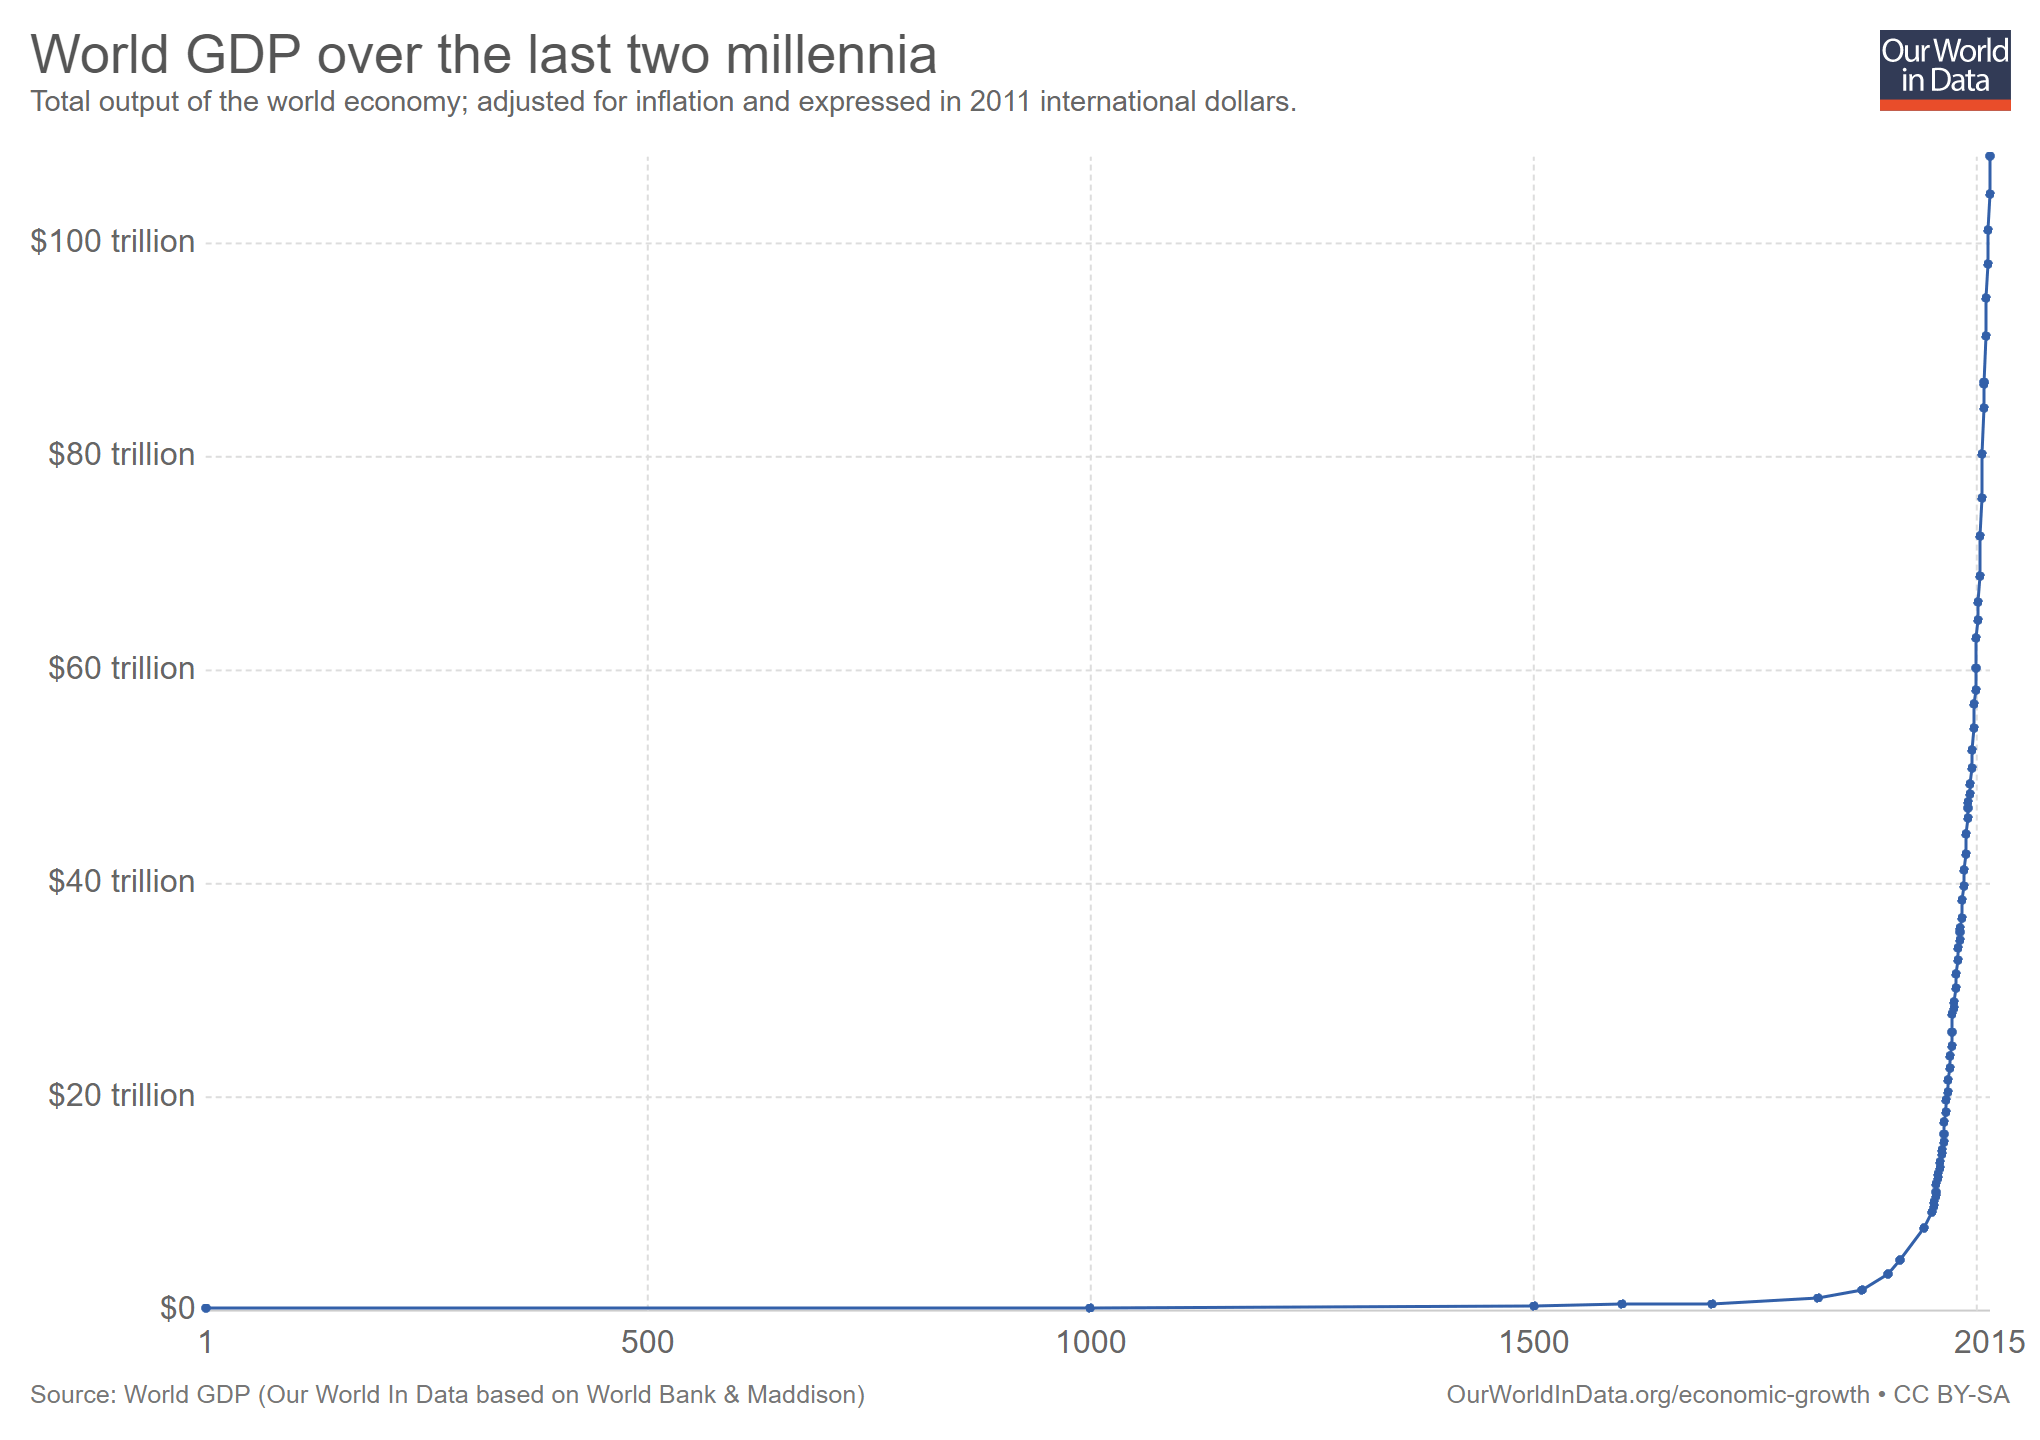 global-world-gdp-over-the-last-two-millennia